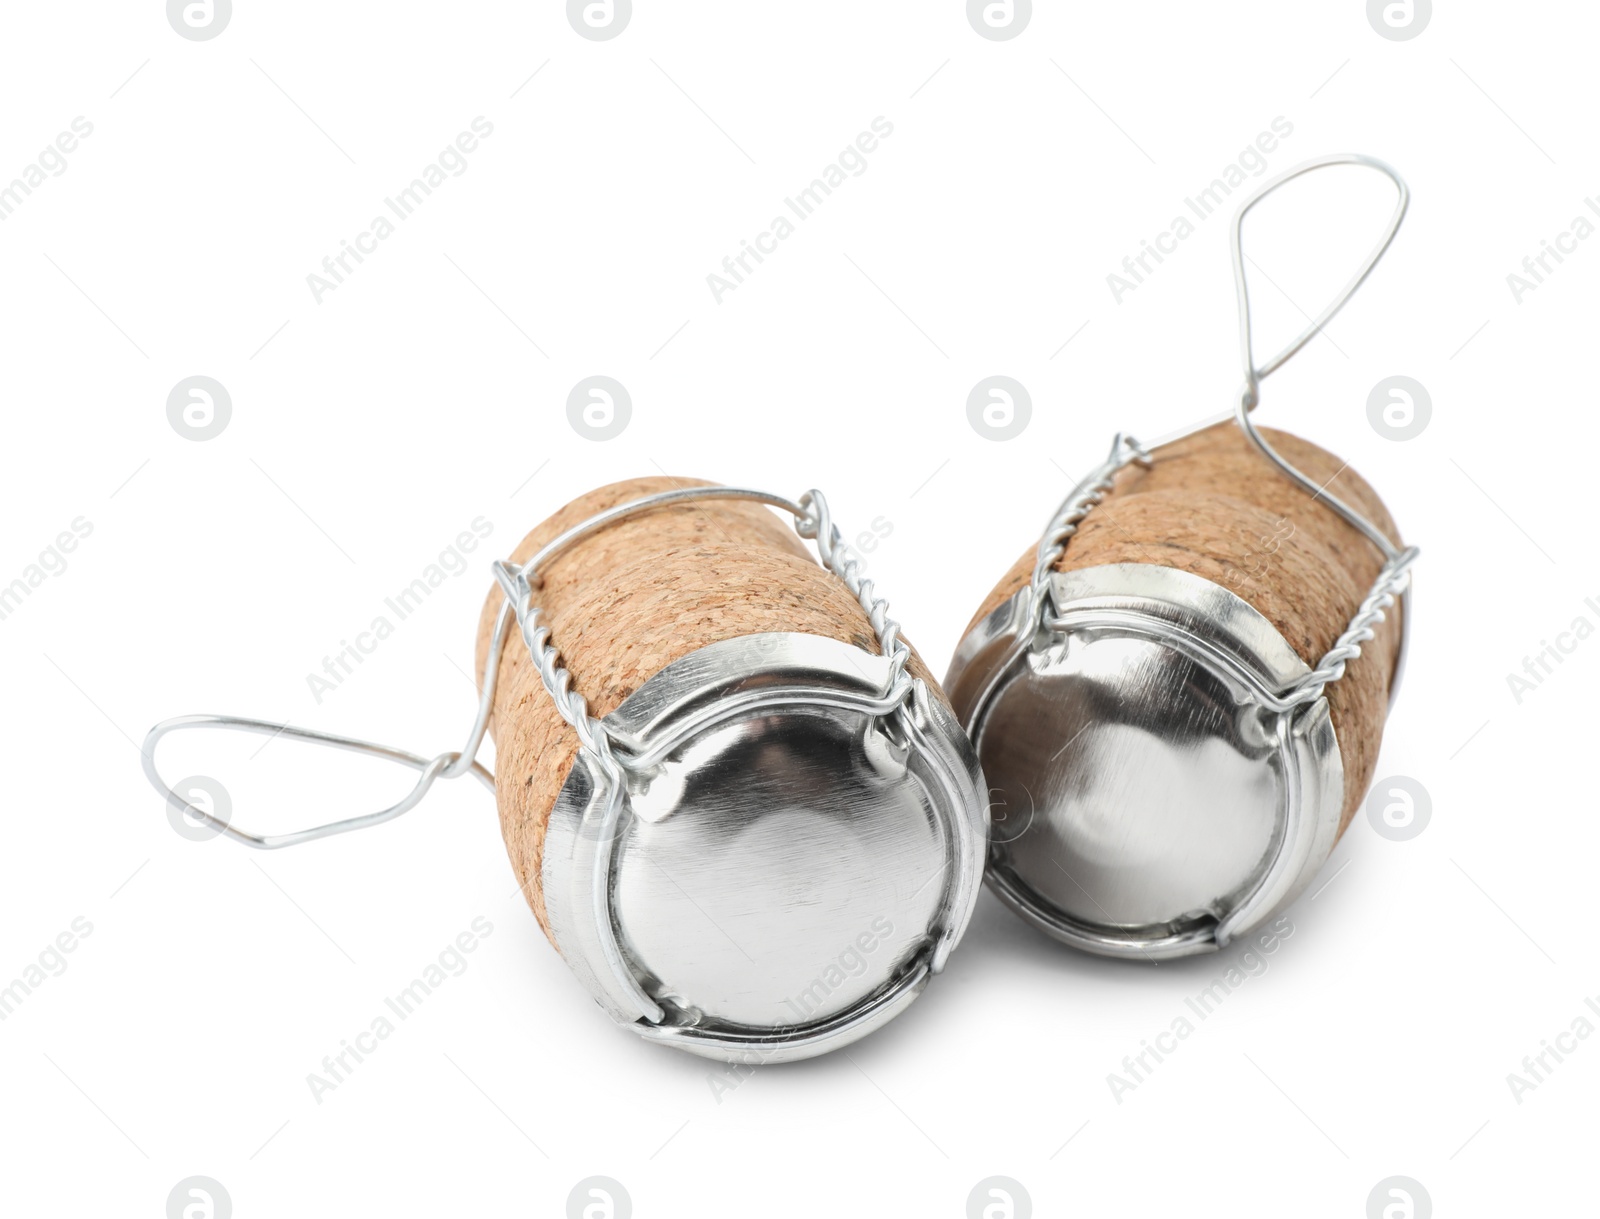 Photo of Sparkling wine corks with muselet caps on white background